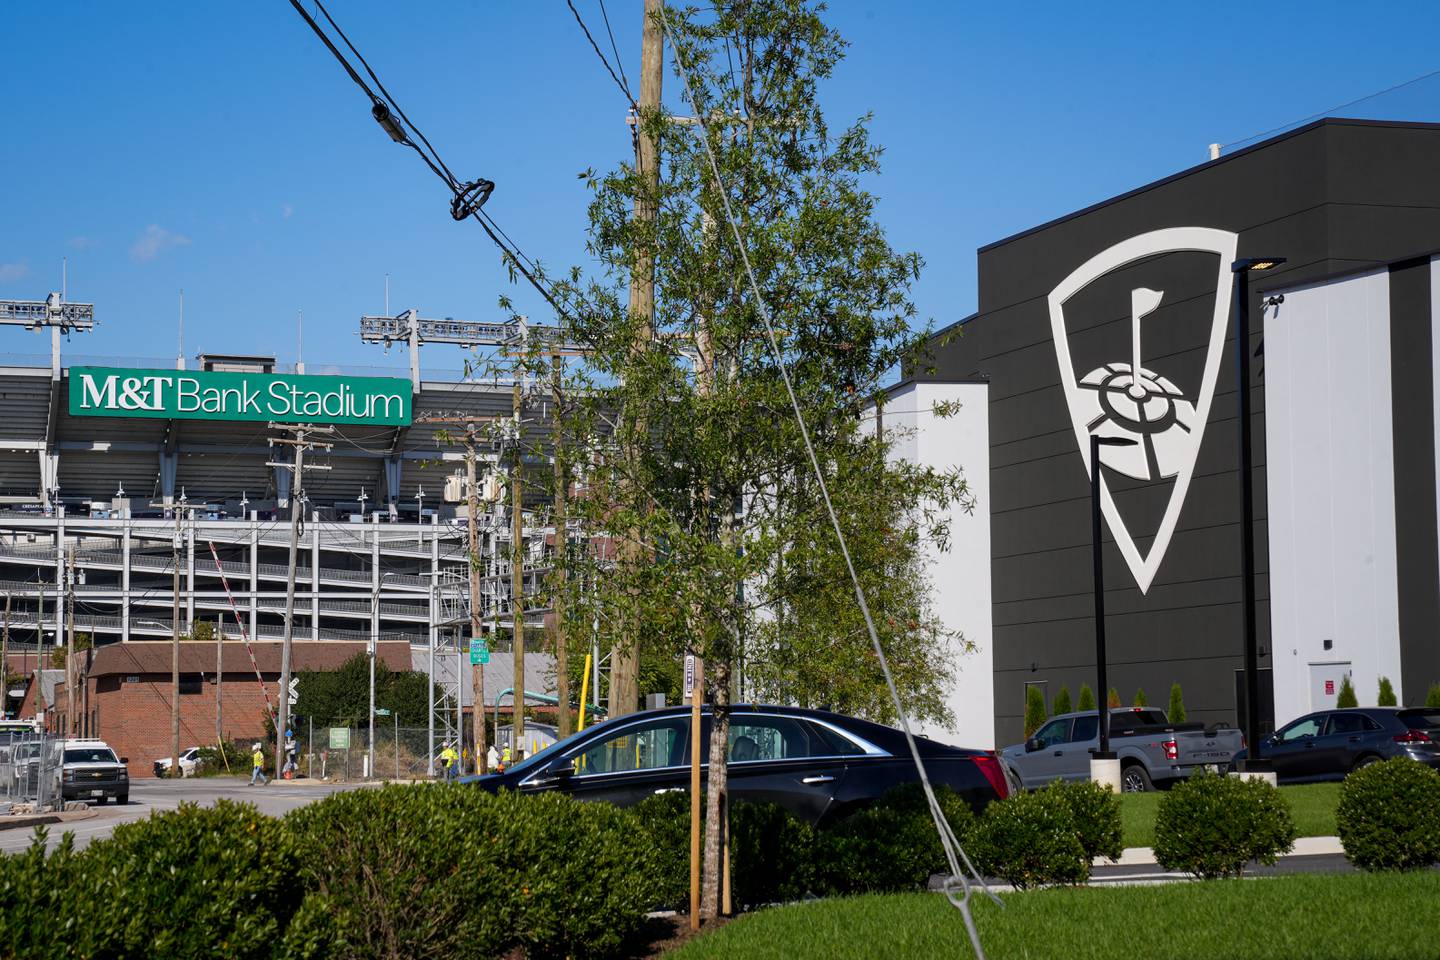 Exterior of M&T Bank Stadium and Topgolf in South Baltimore on 10/7/22.